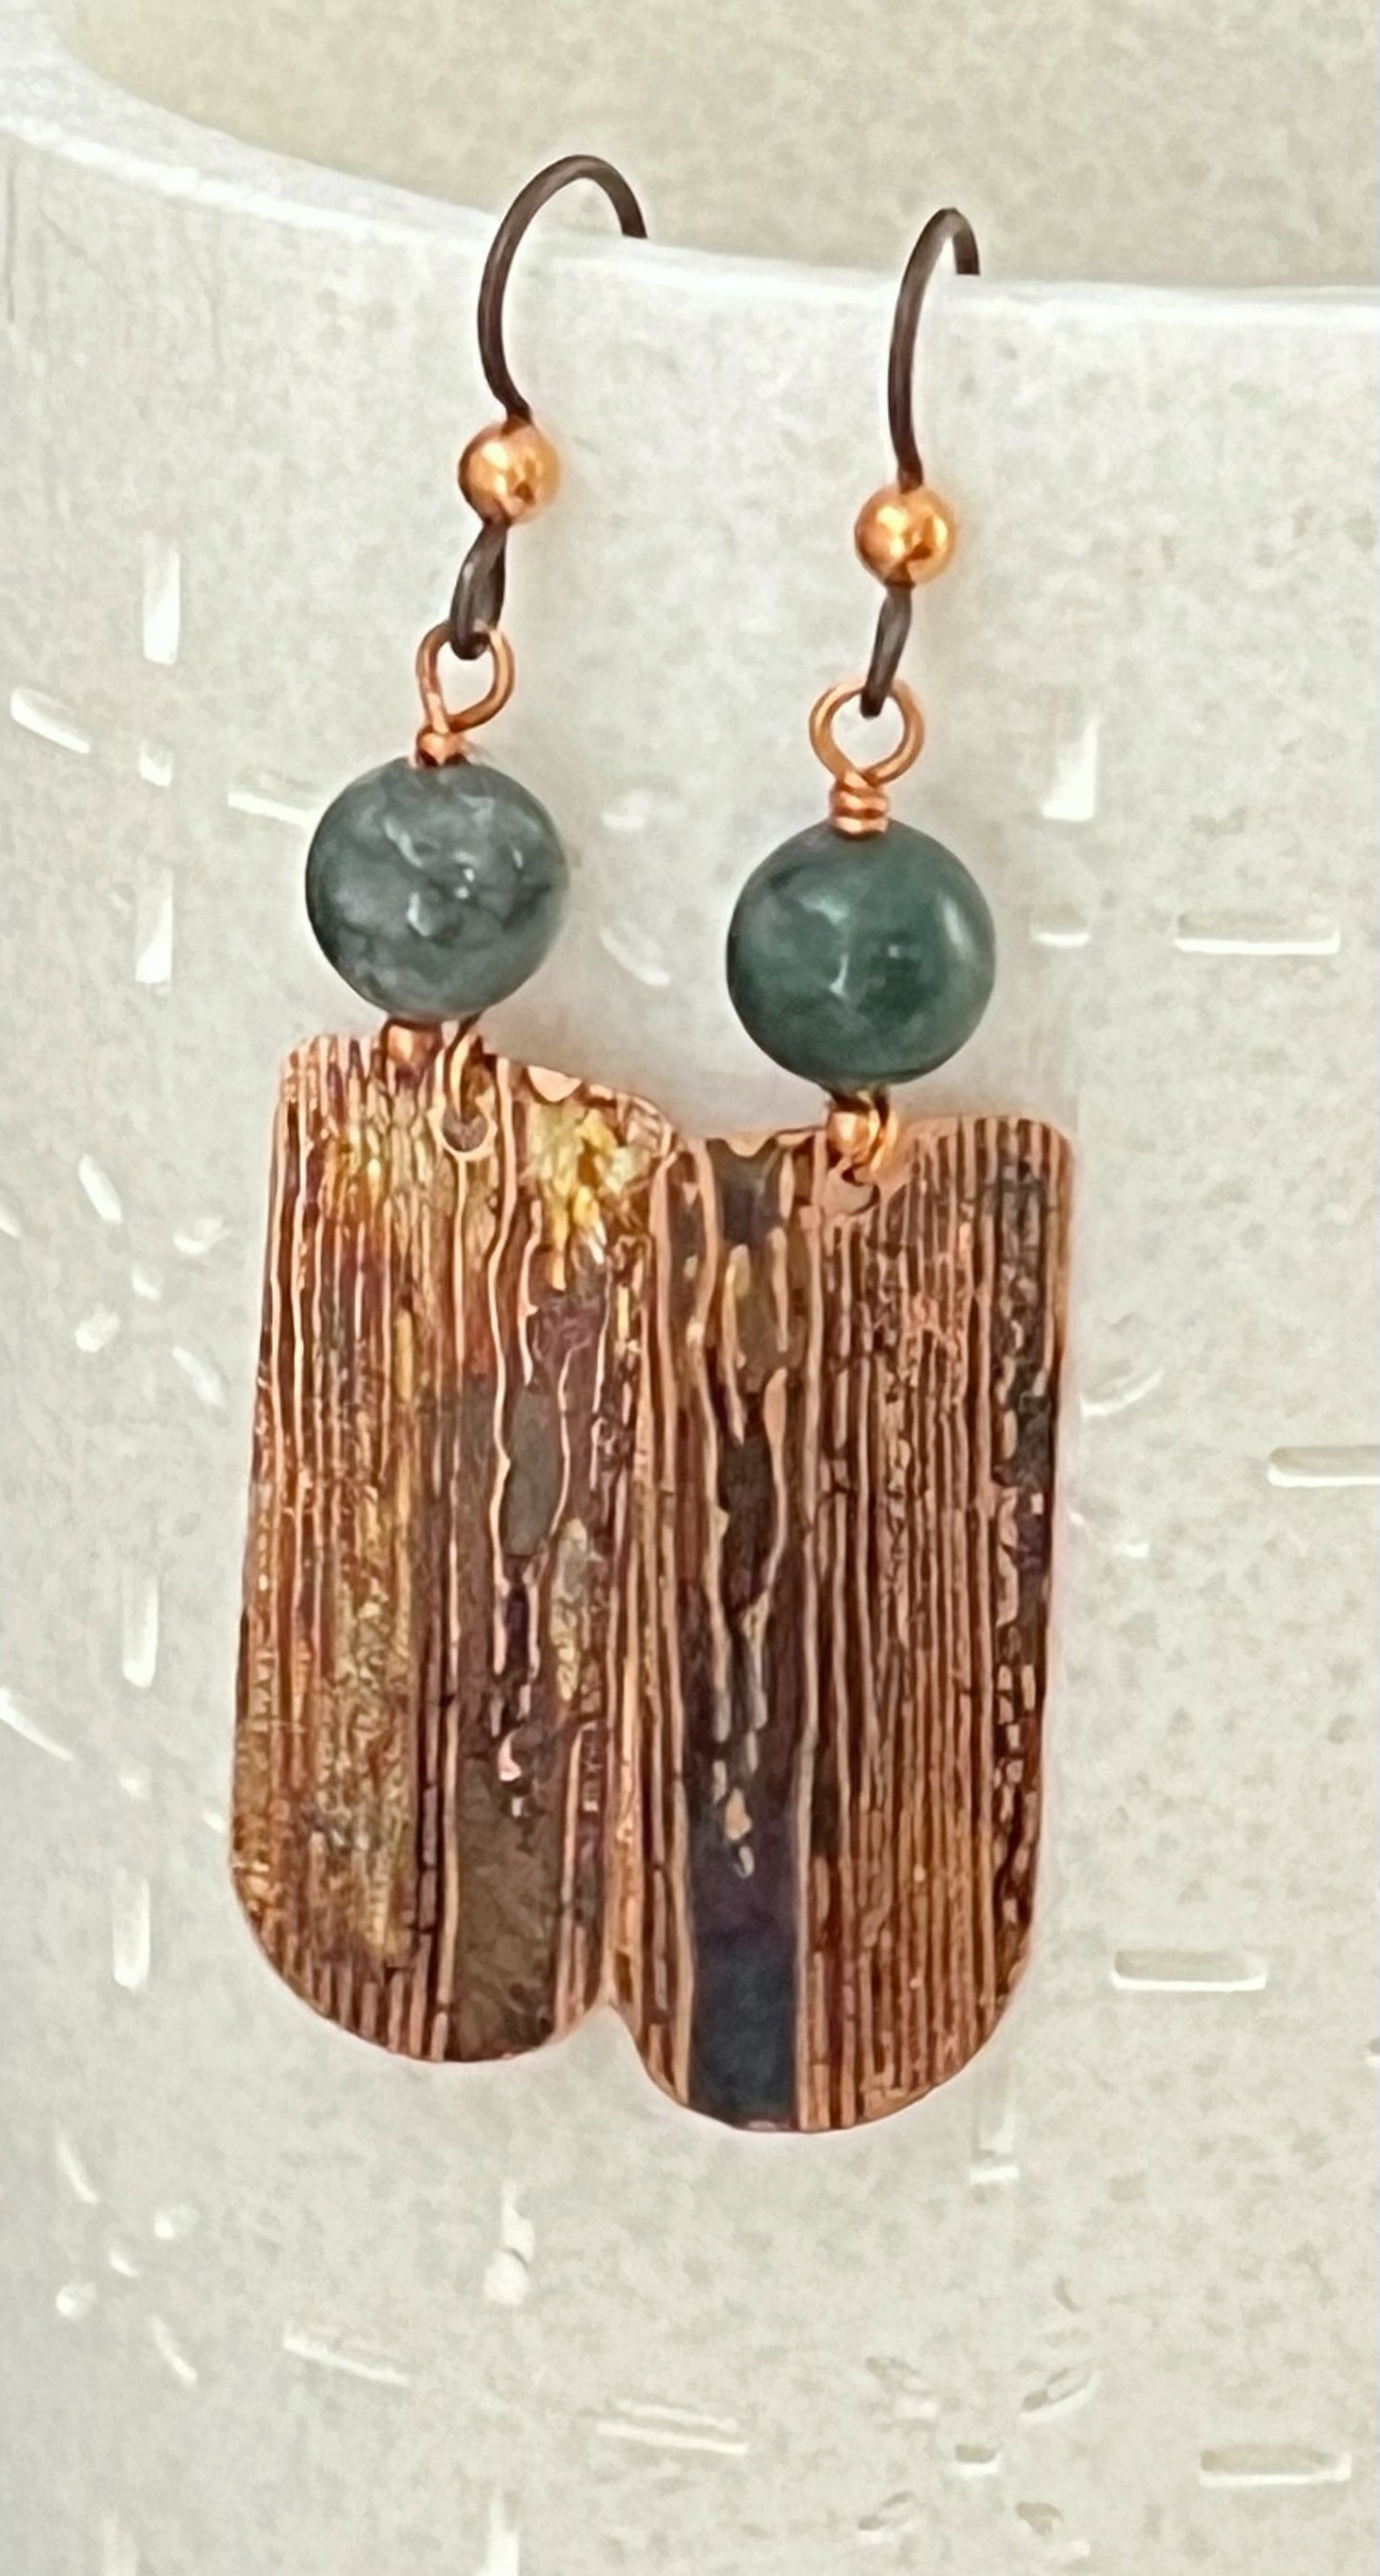 Acid etched copper earrings with moss agate gemstones